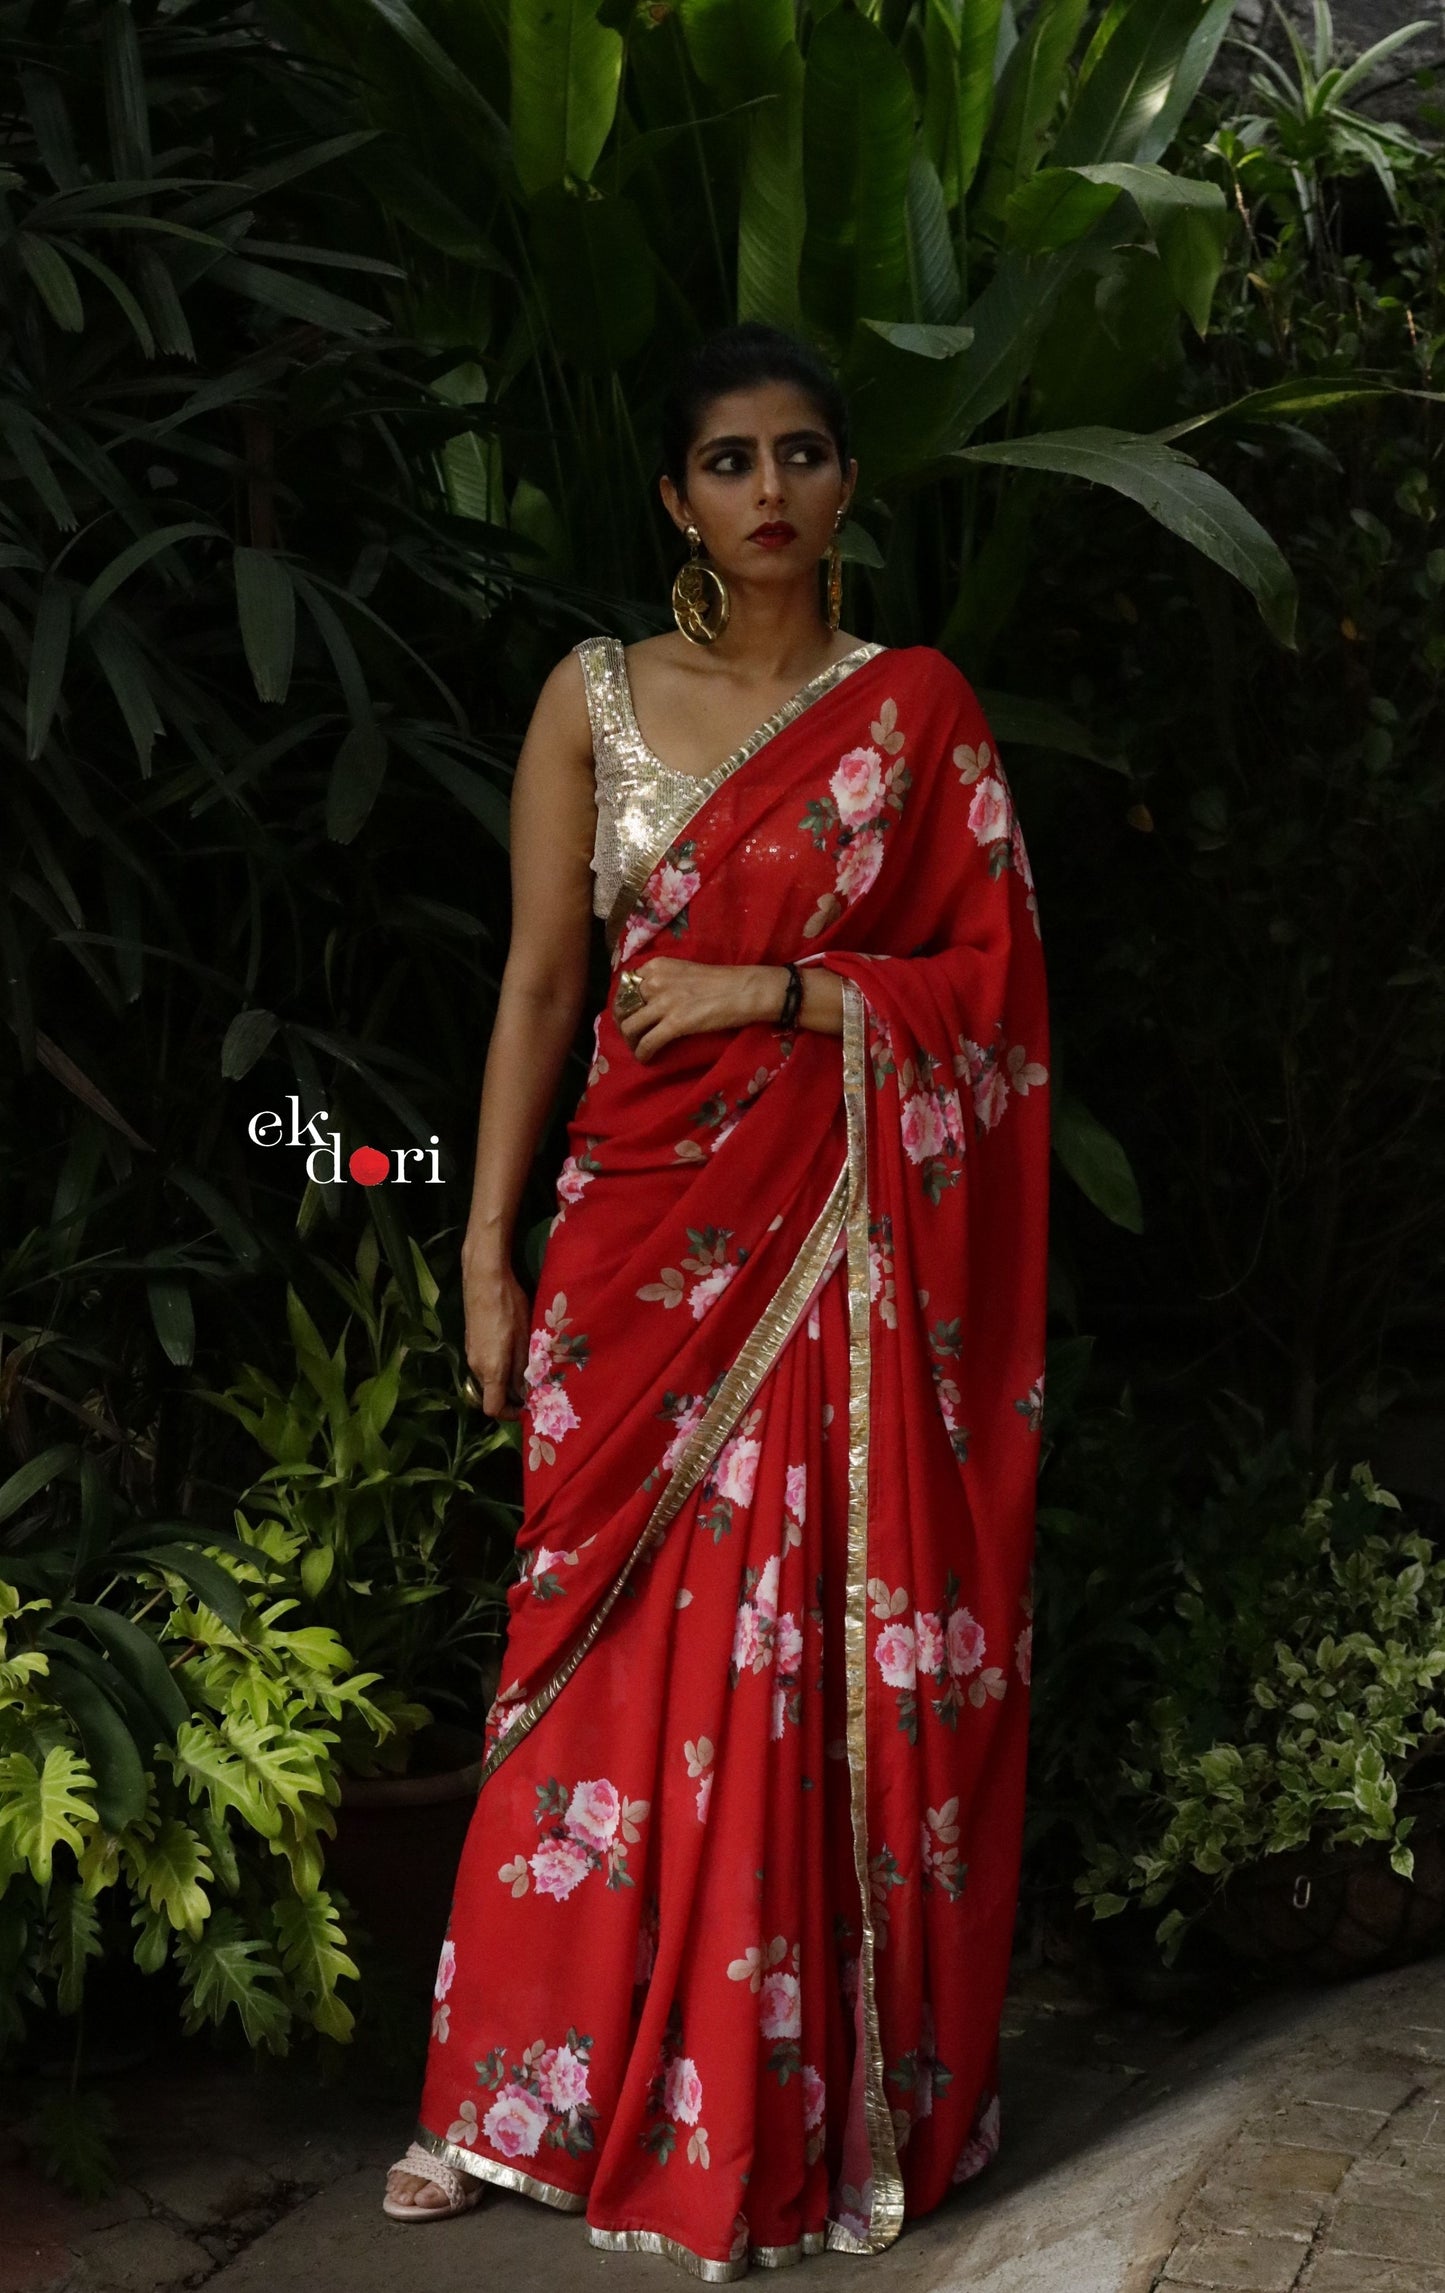 'The Queen' Red Floral Georgette Saree : Buy Festive Sarees Online